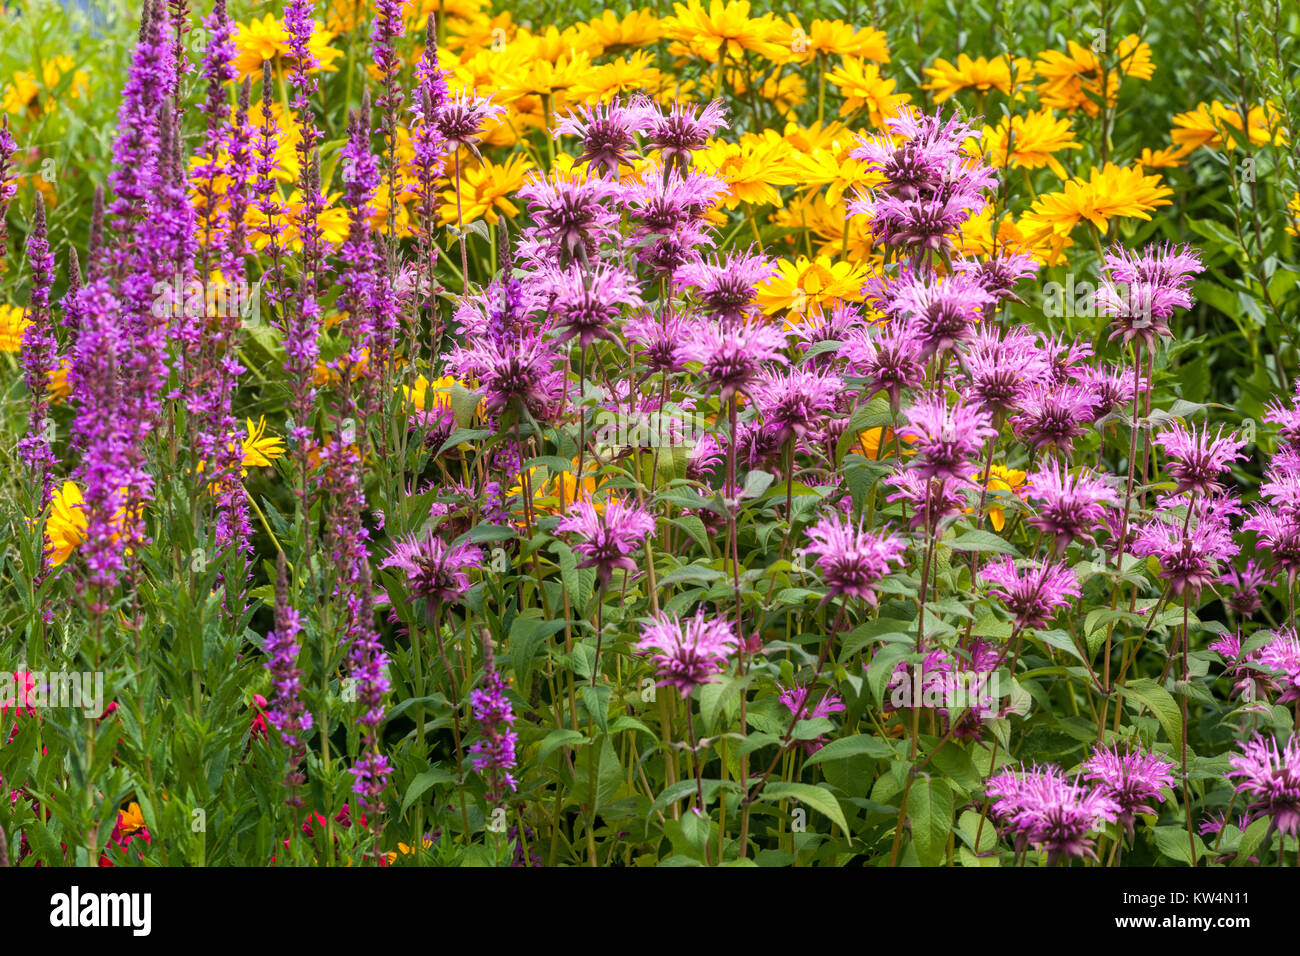 Monarda, False sunflowers, and purple loosestrife in summer garden border flowers mixed flowers purple garden flowerbed display colourful flower bed Stock Photo